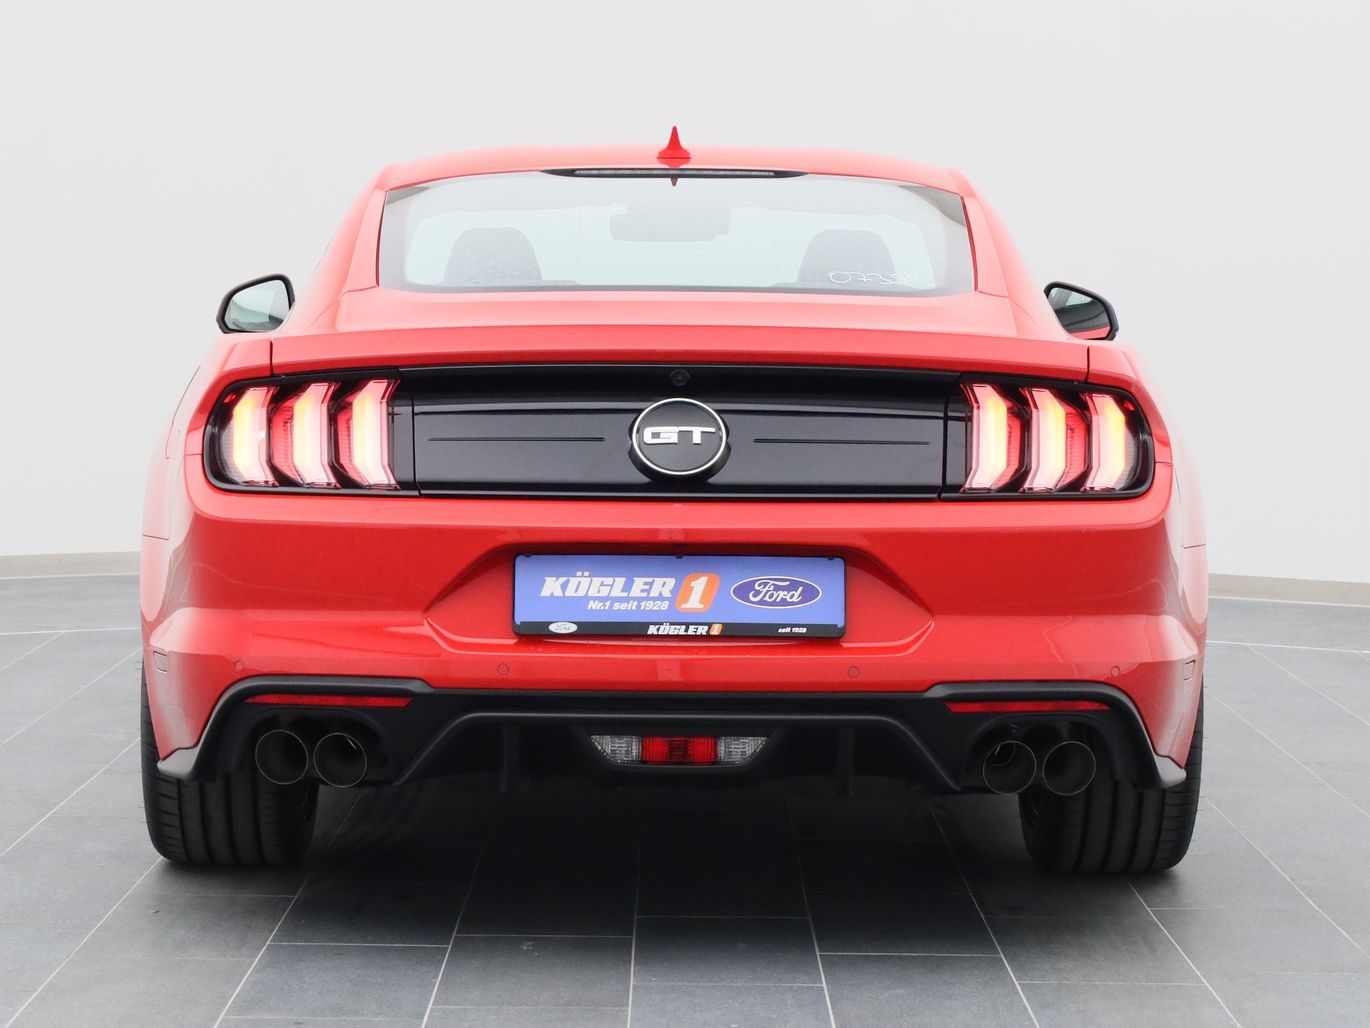 Heckansicht eines Ford Mustang GT Coupé V8 450PS Aut / Premium 2 in Race-rot 